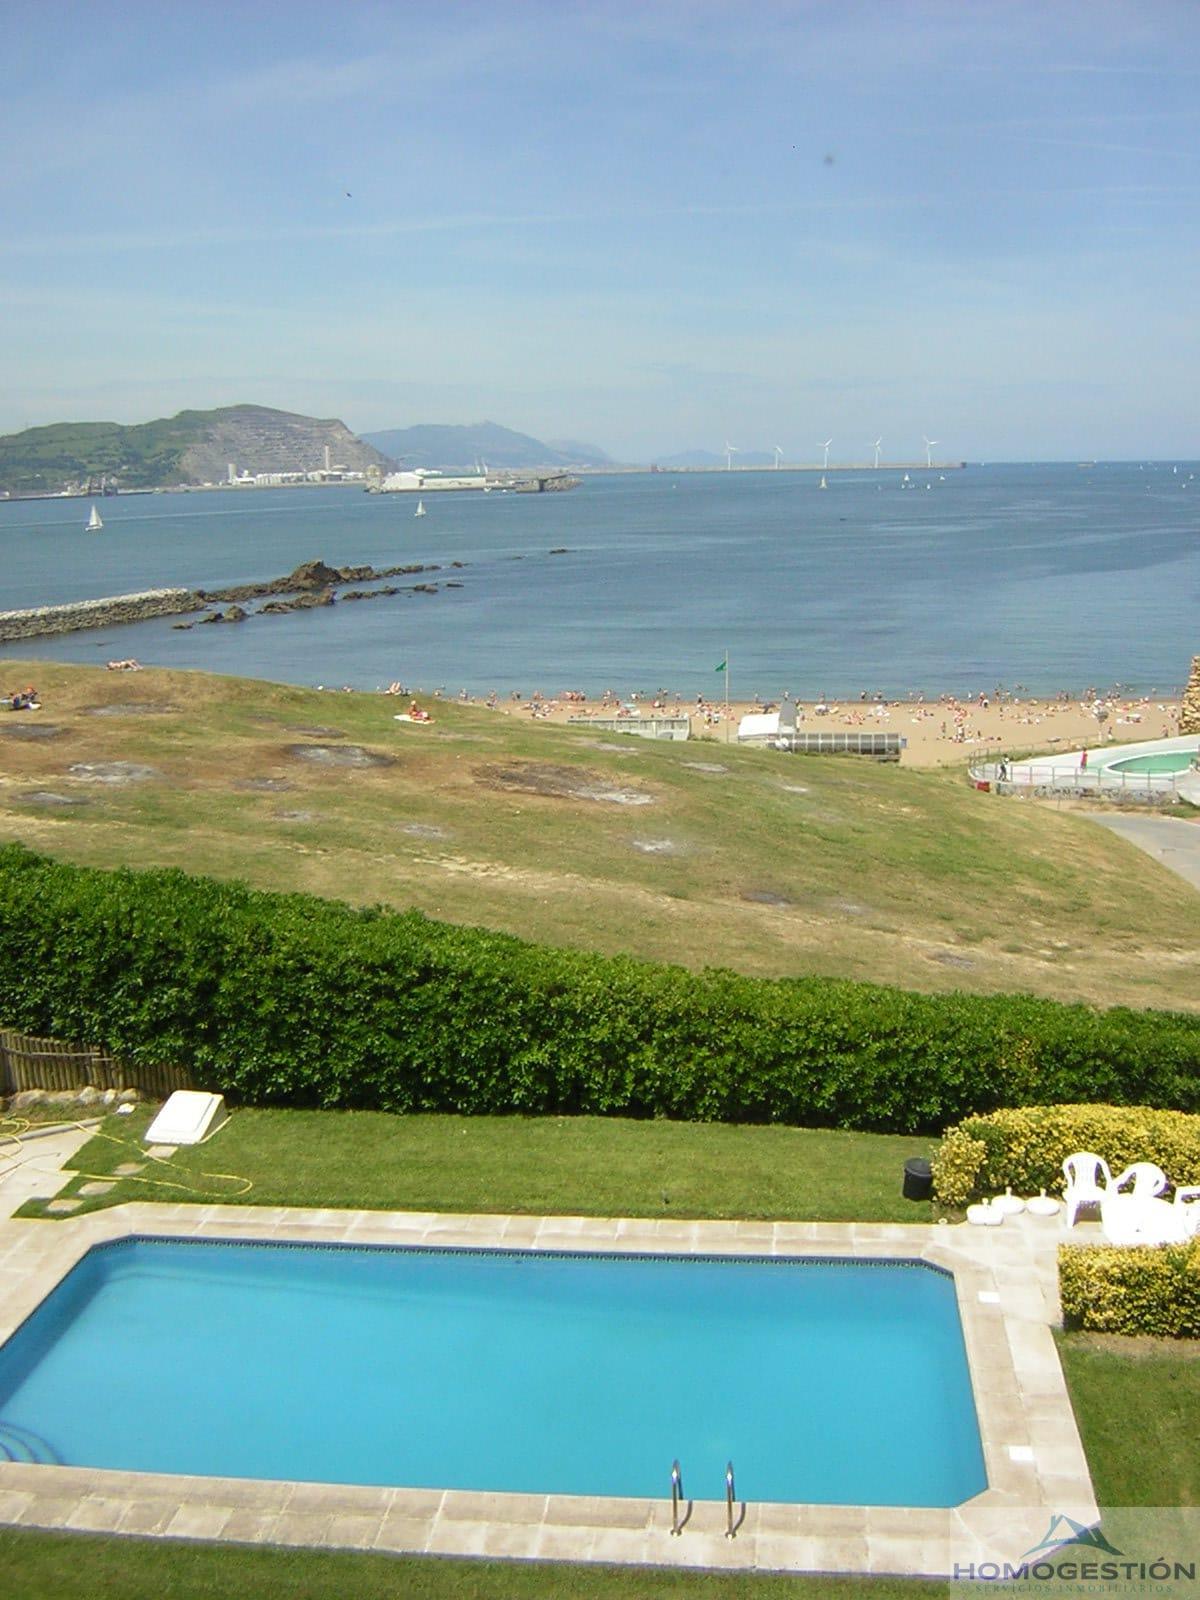 For rent of flat in Getxo